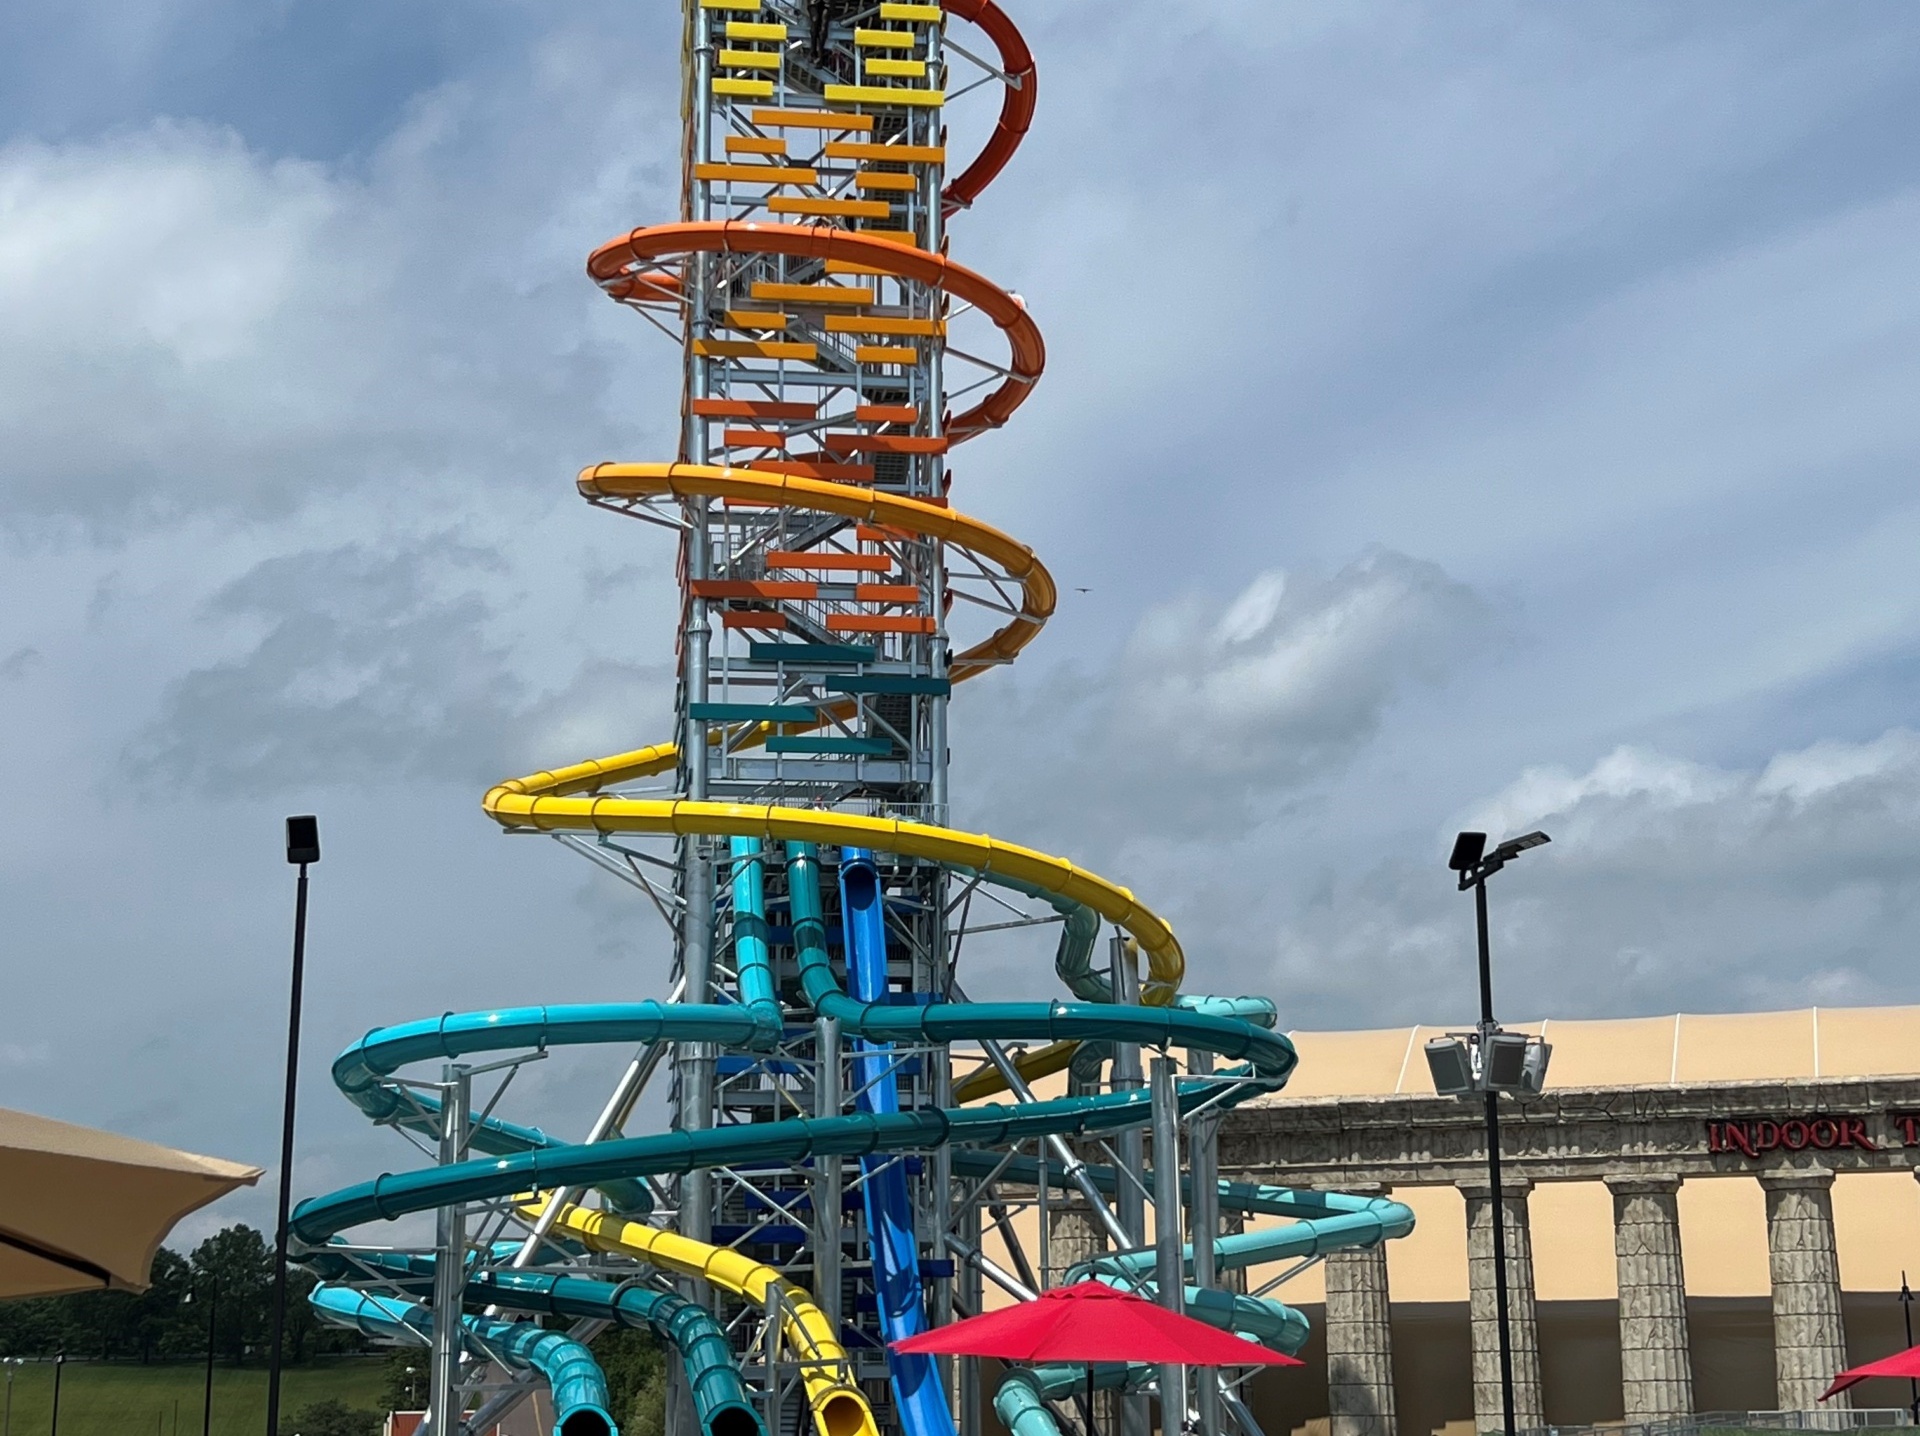 Very tall, colorful water slide tower